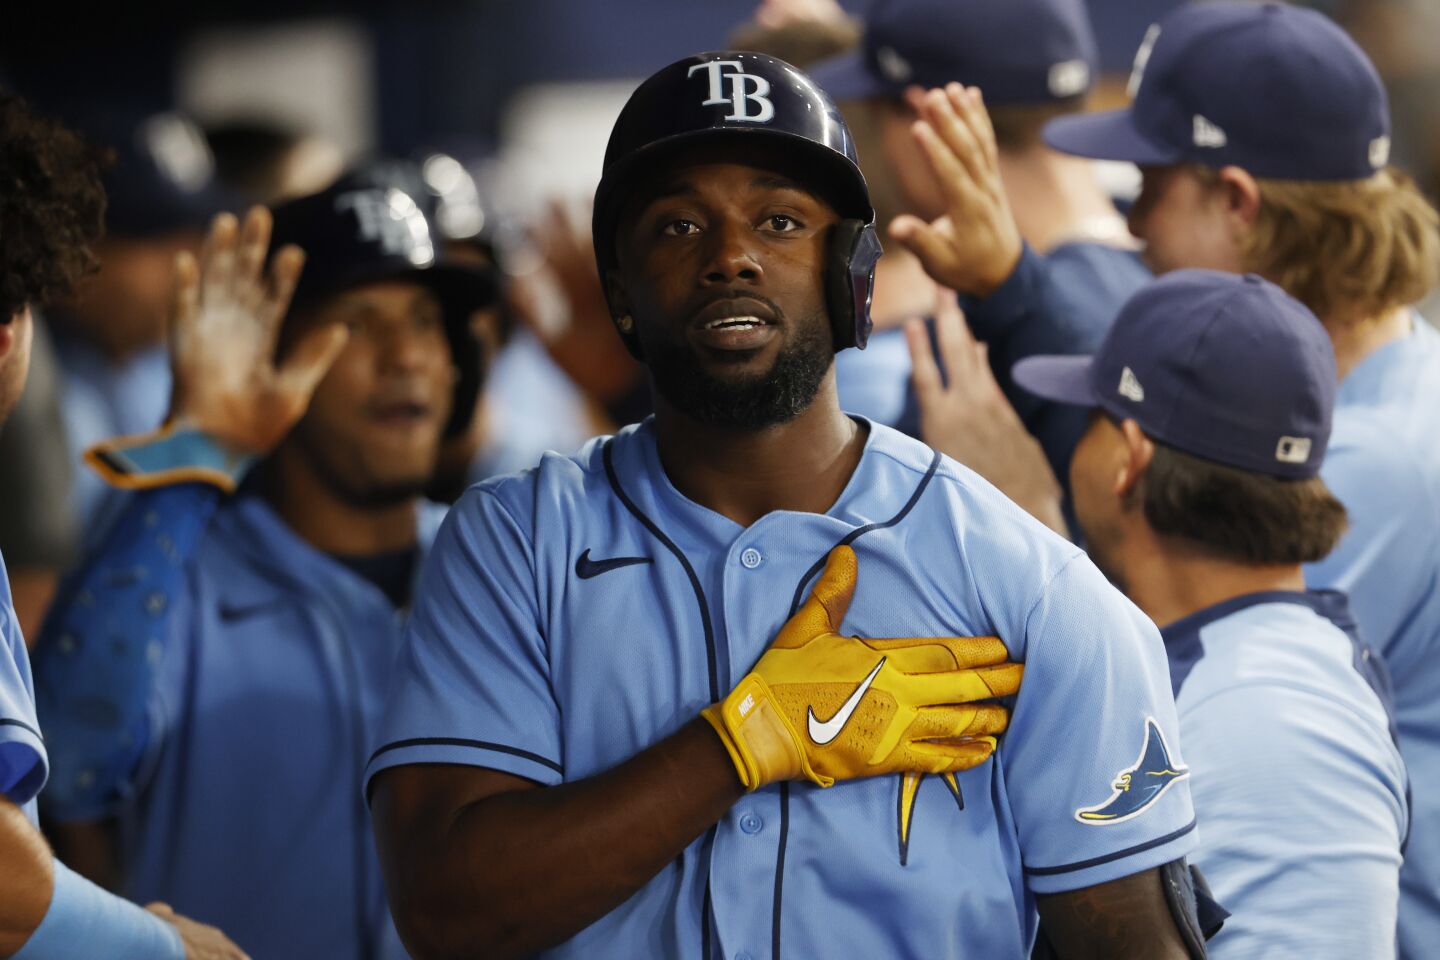 10 | Tampa Bay Rays (84-69; LW: 8)The new wild-card format is creating all kinds of fight in Tampa Bay, but the altercation between Randy Arozarena and Yandy Diaz isn't quite what Commissioner Rob Manfred had in mind.